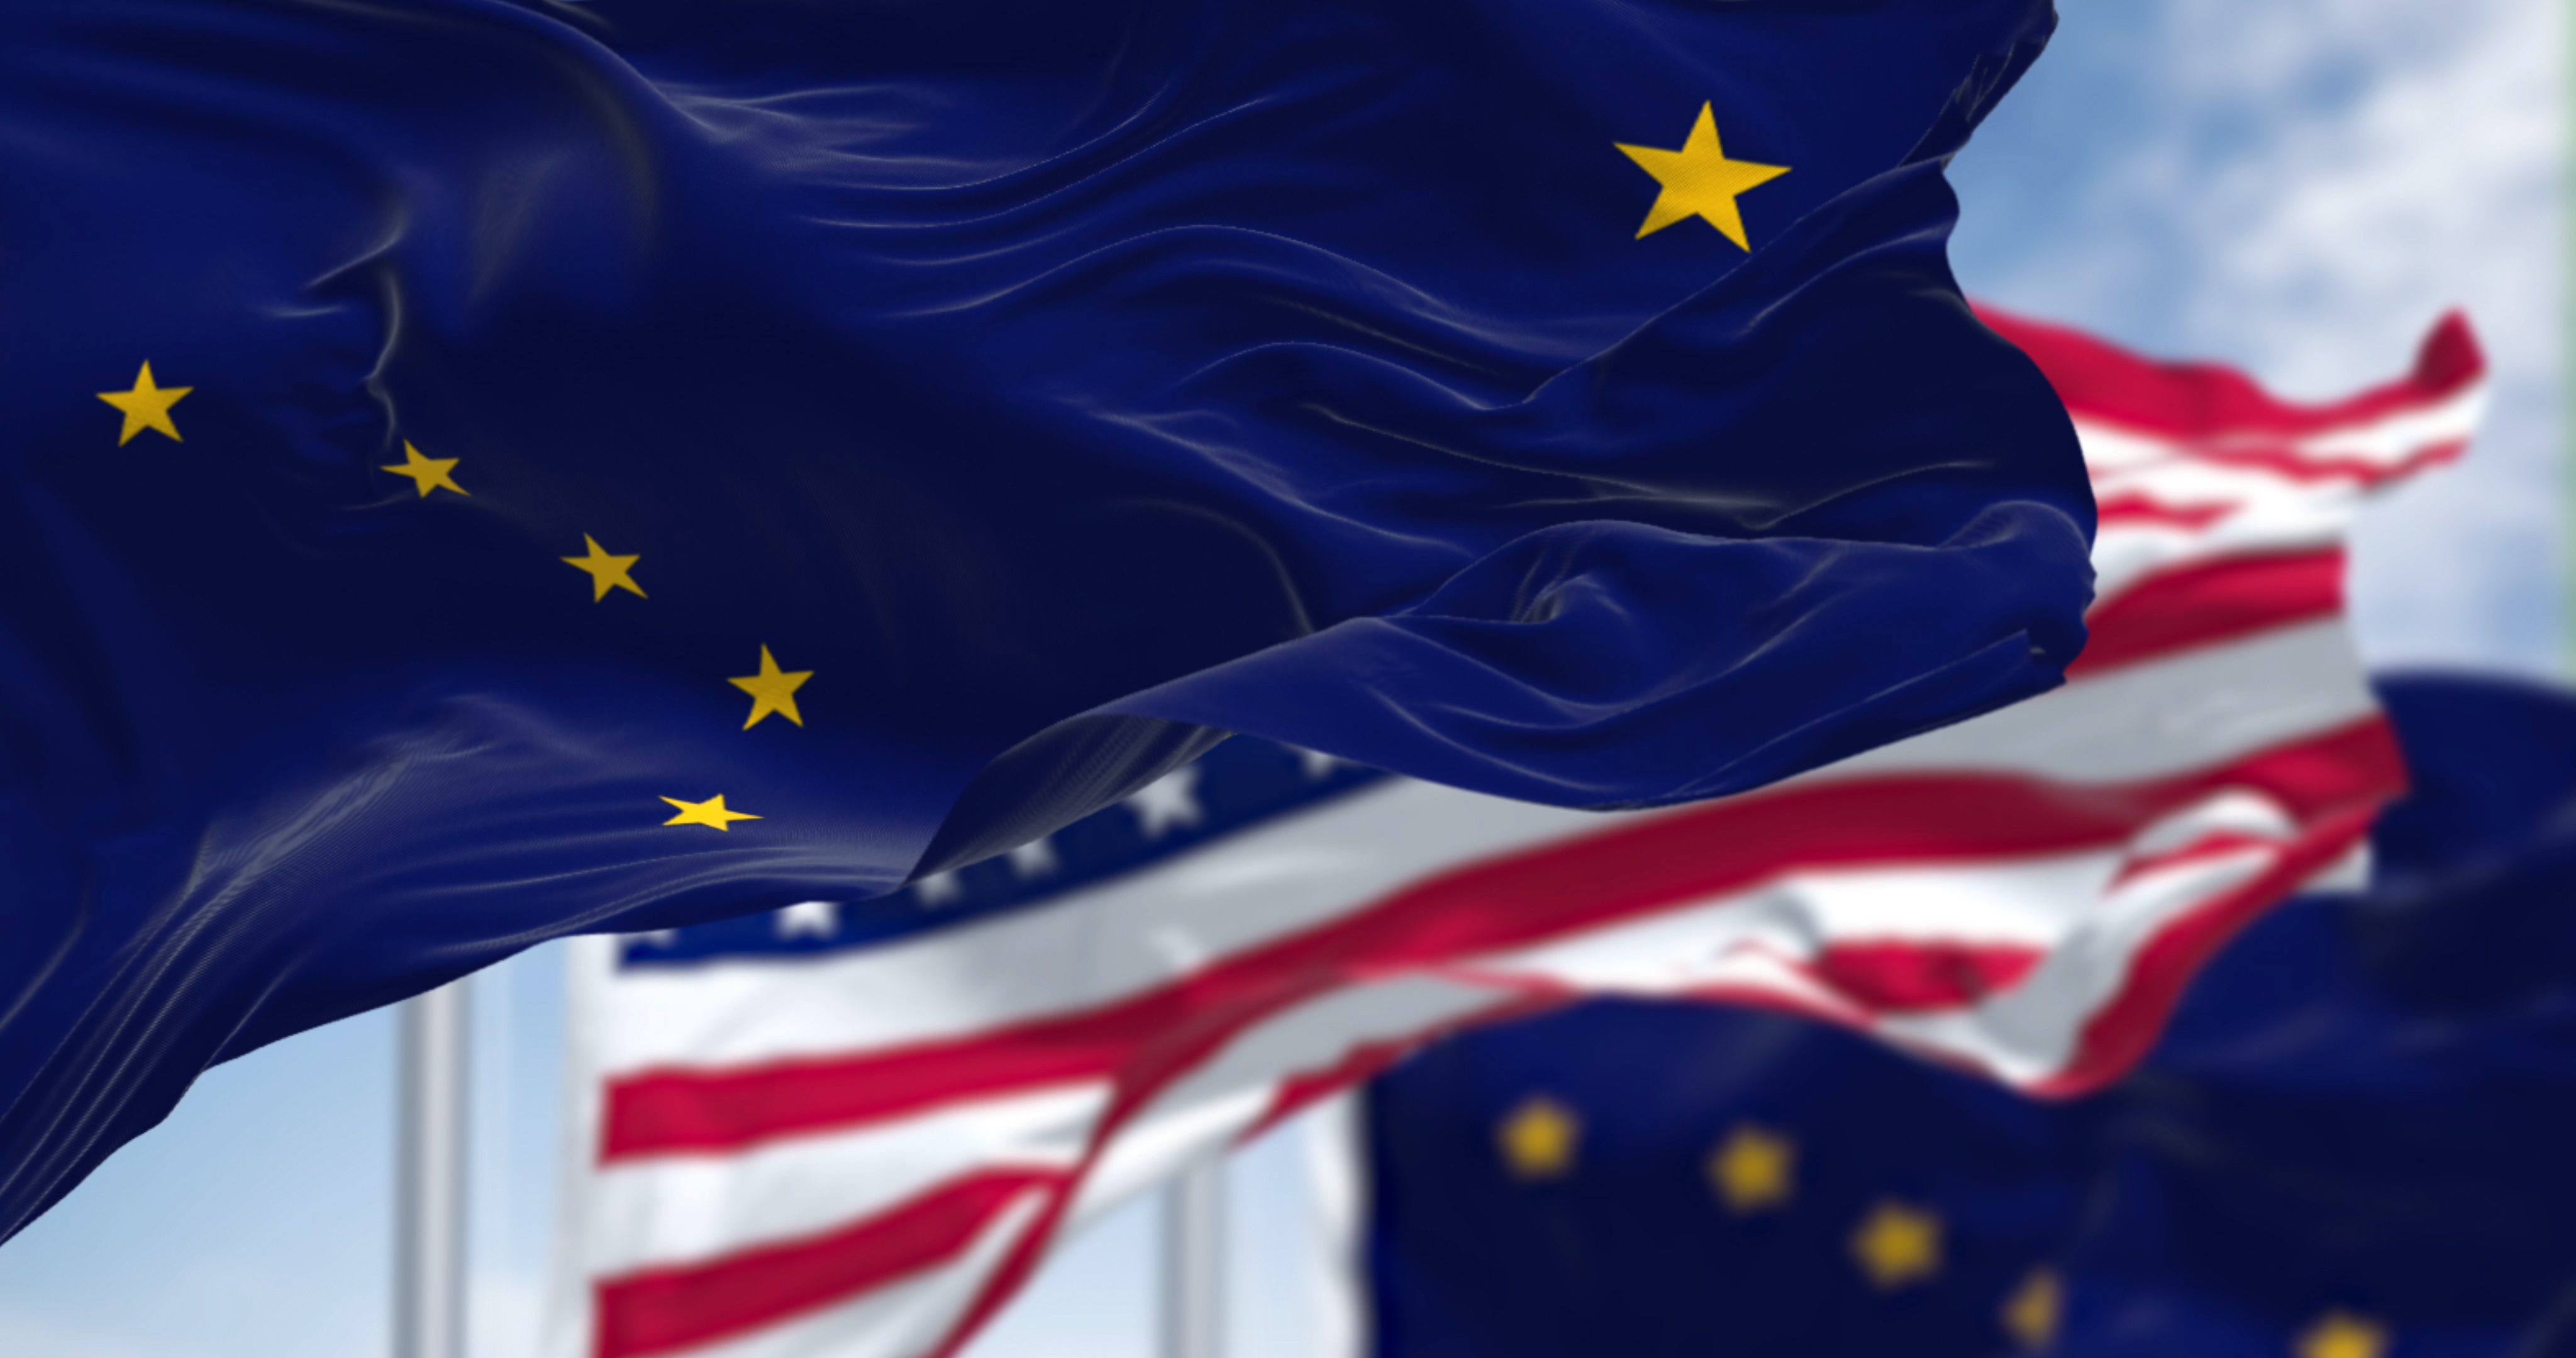 The flags of the Alaska state and United States waving in the wind.